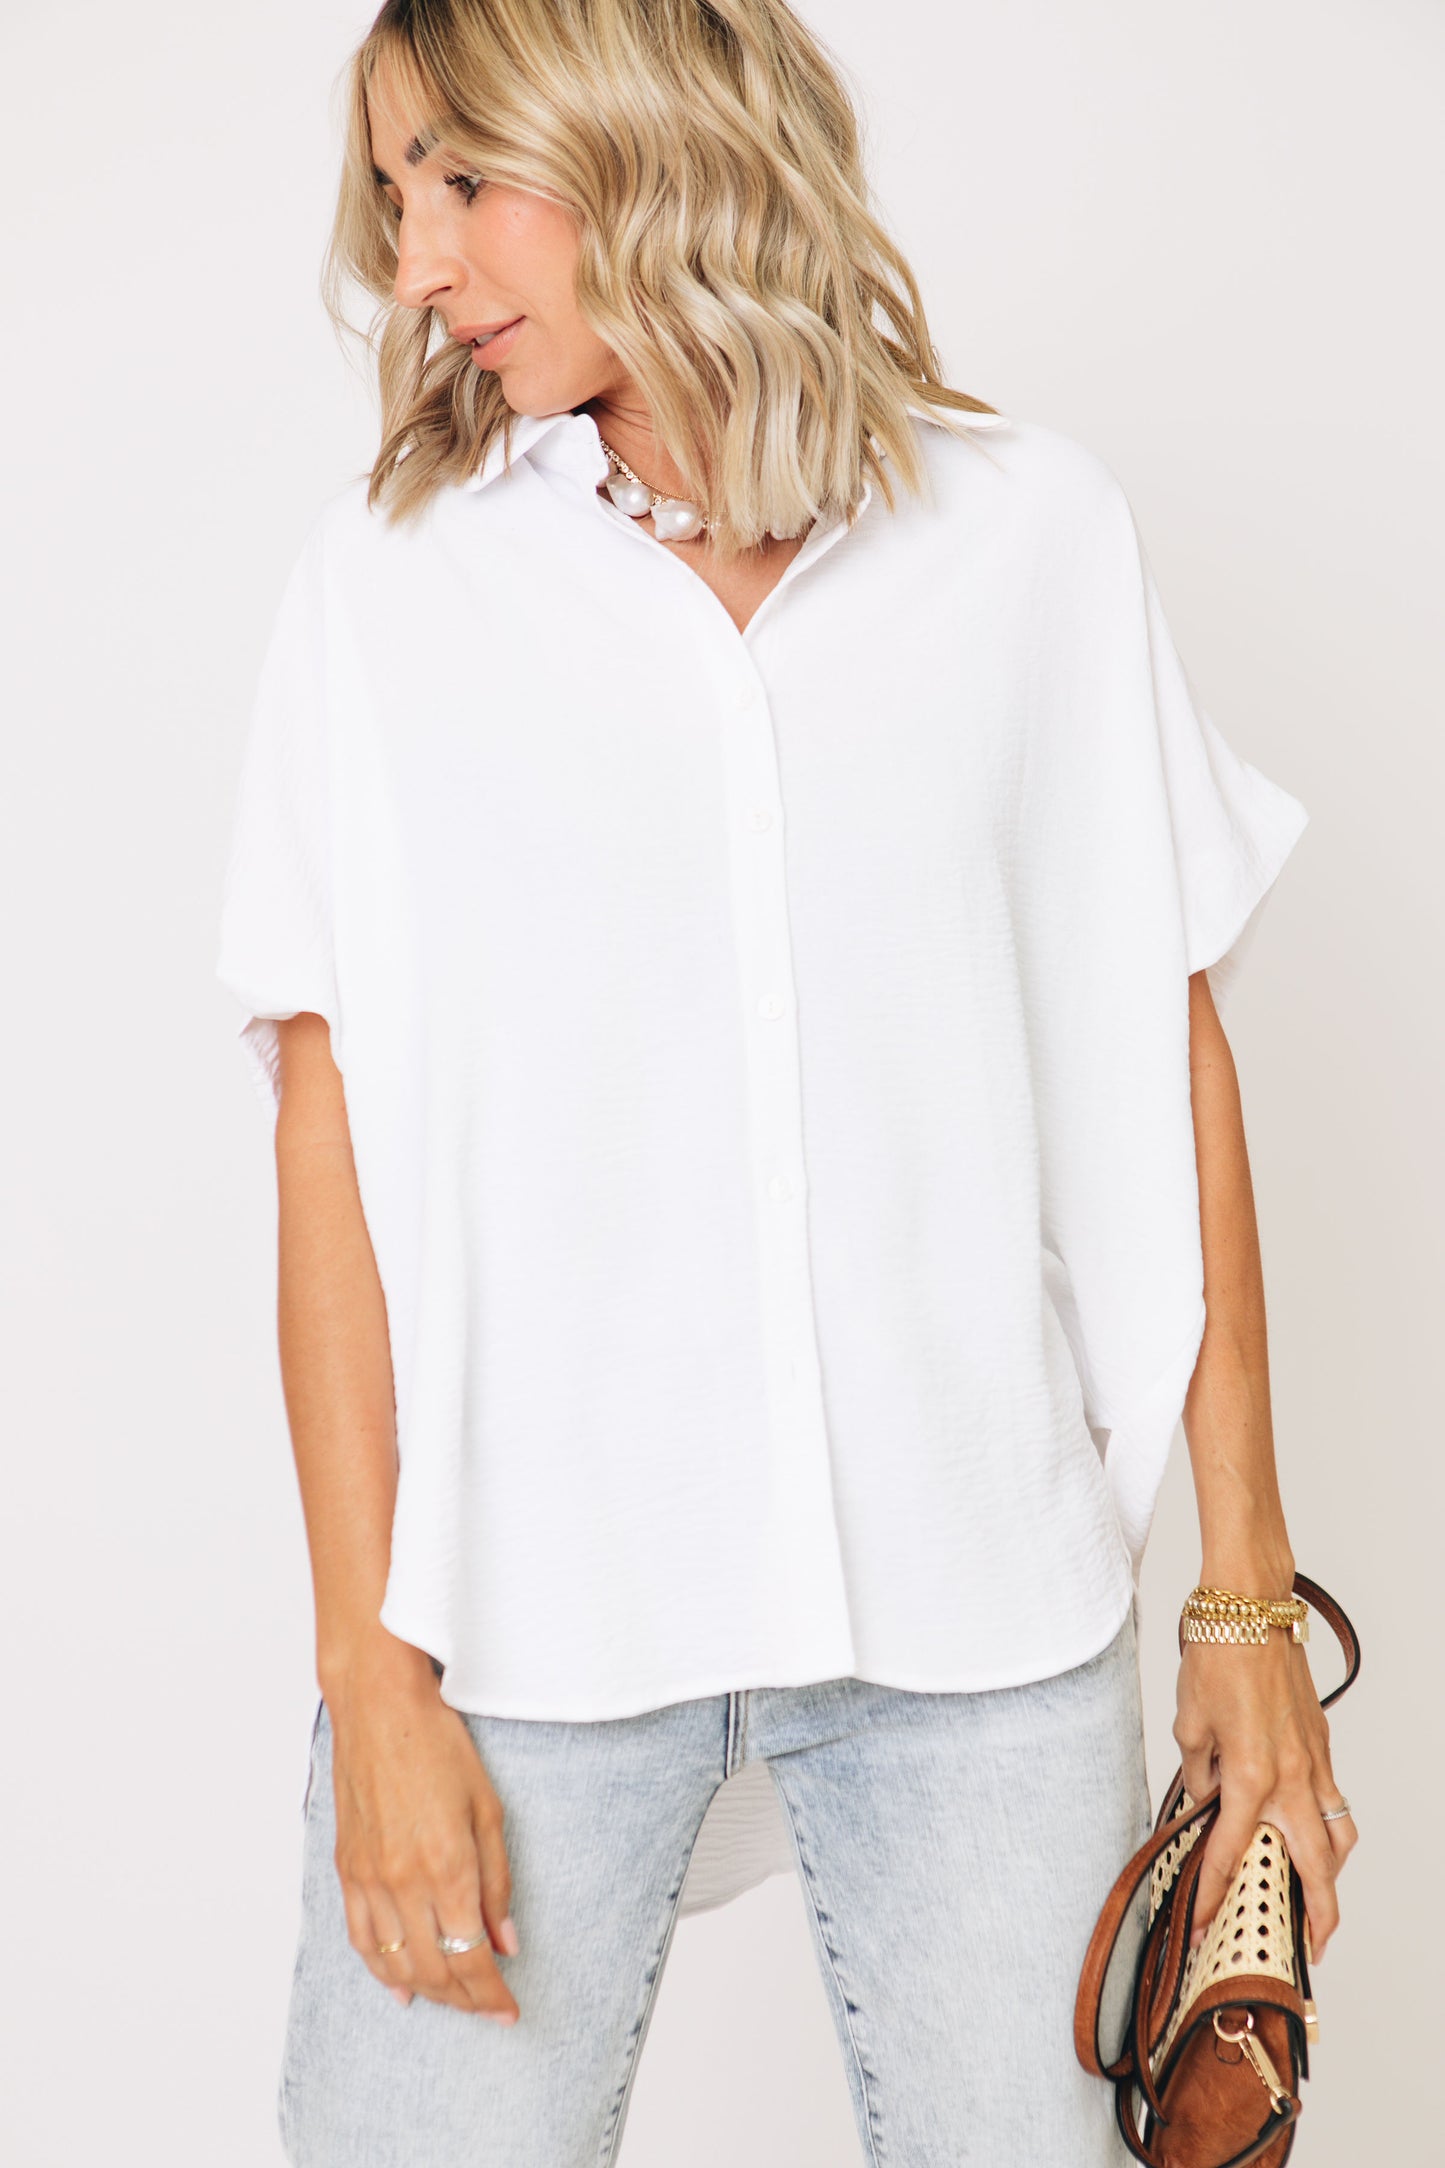 RESTOCKED - Best Boyfriend Fit Solid Collared Button-Up Top (S-L)